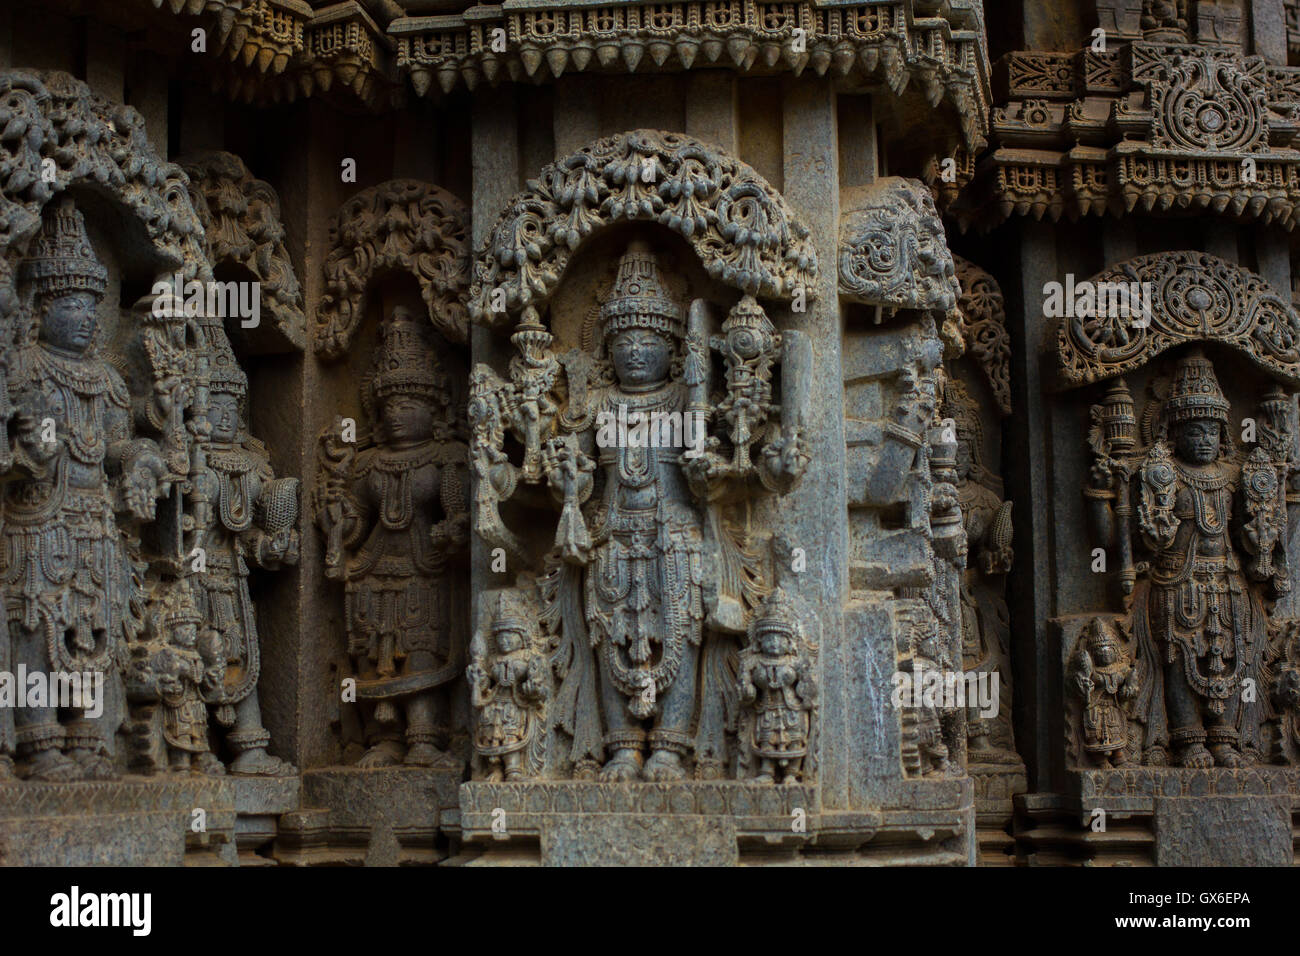 A Brief History of the Breathtaking Belur Chennakeshava Temple